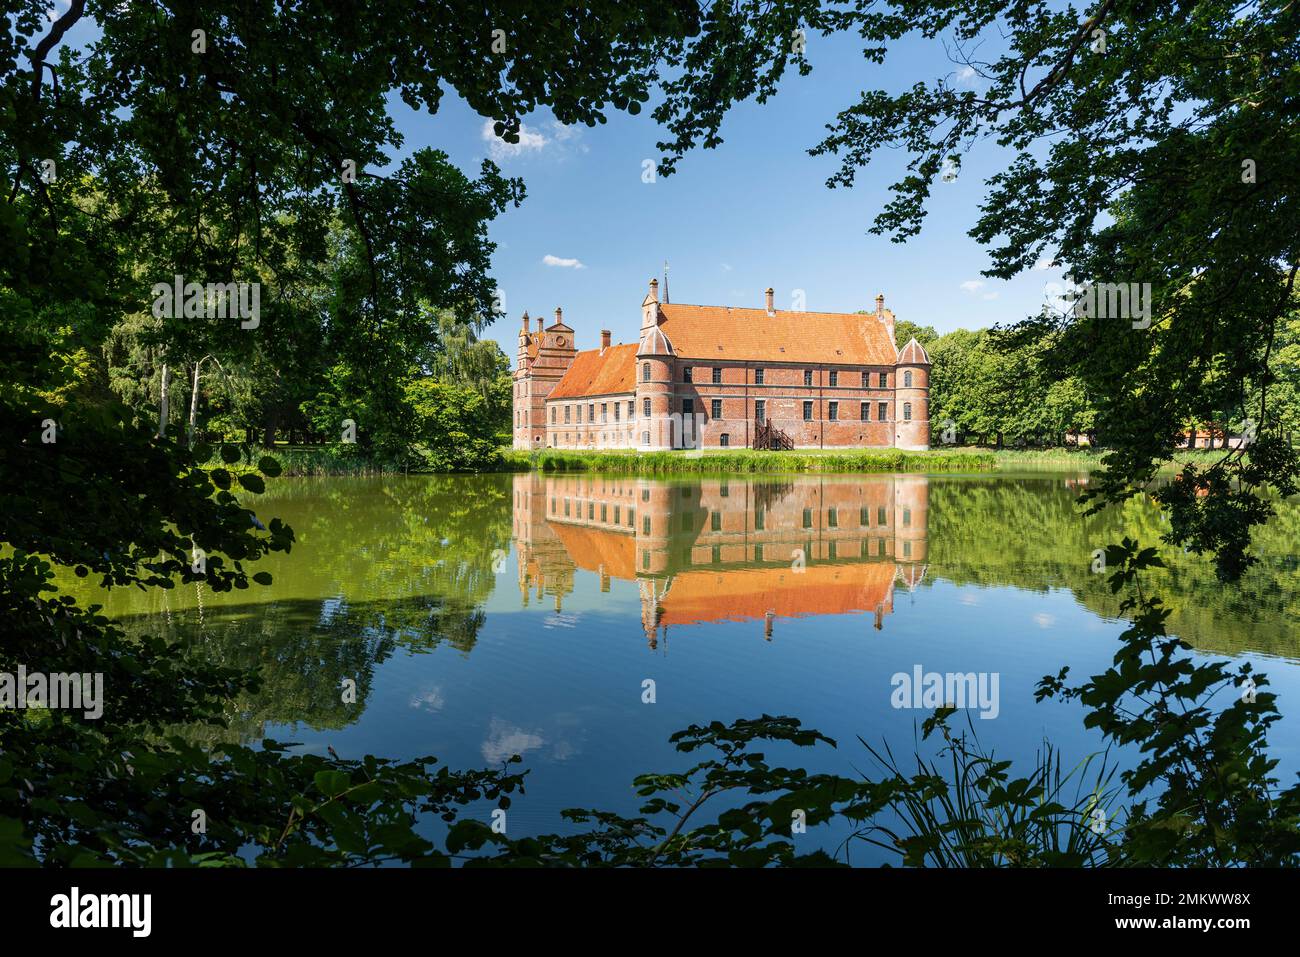 Denmark, Jutland, Djursland: The Renaissance facade of Rosenholm Castle reflected in the water and framed by leaves and branches Stock Photo